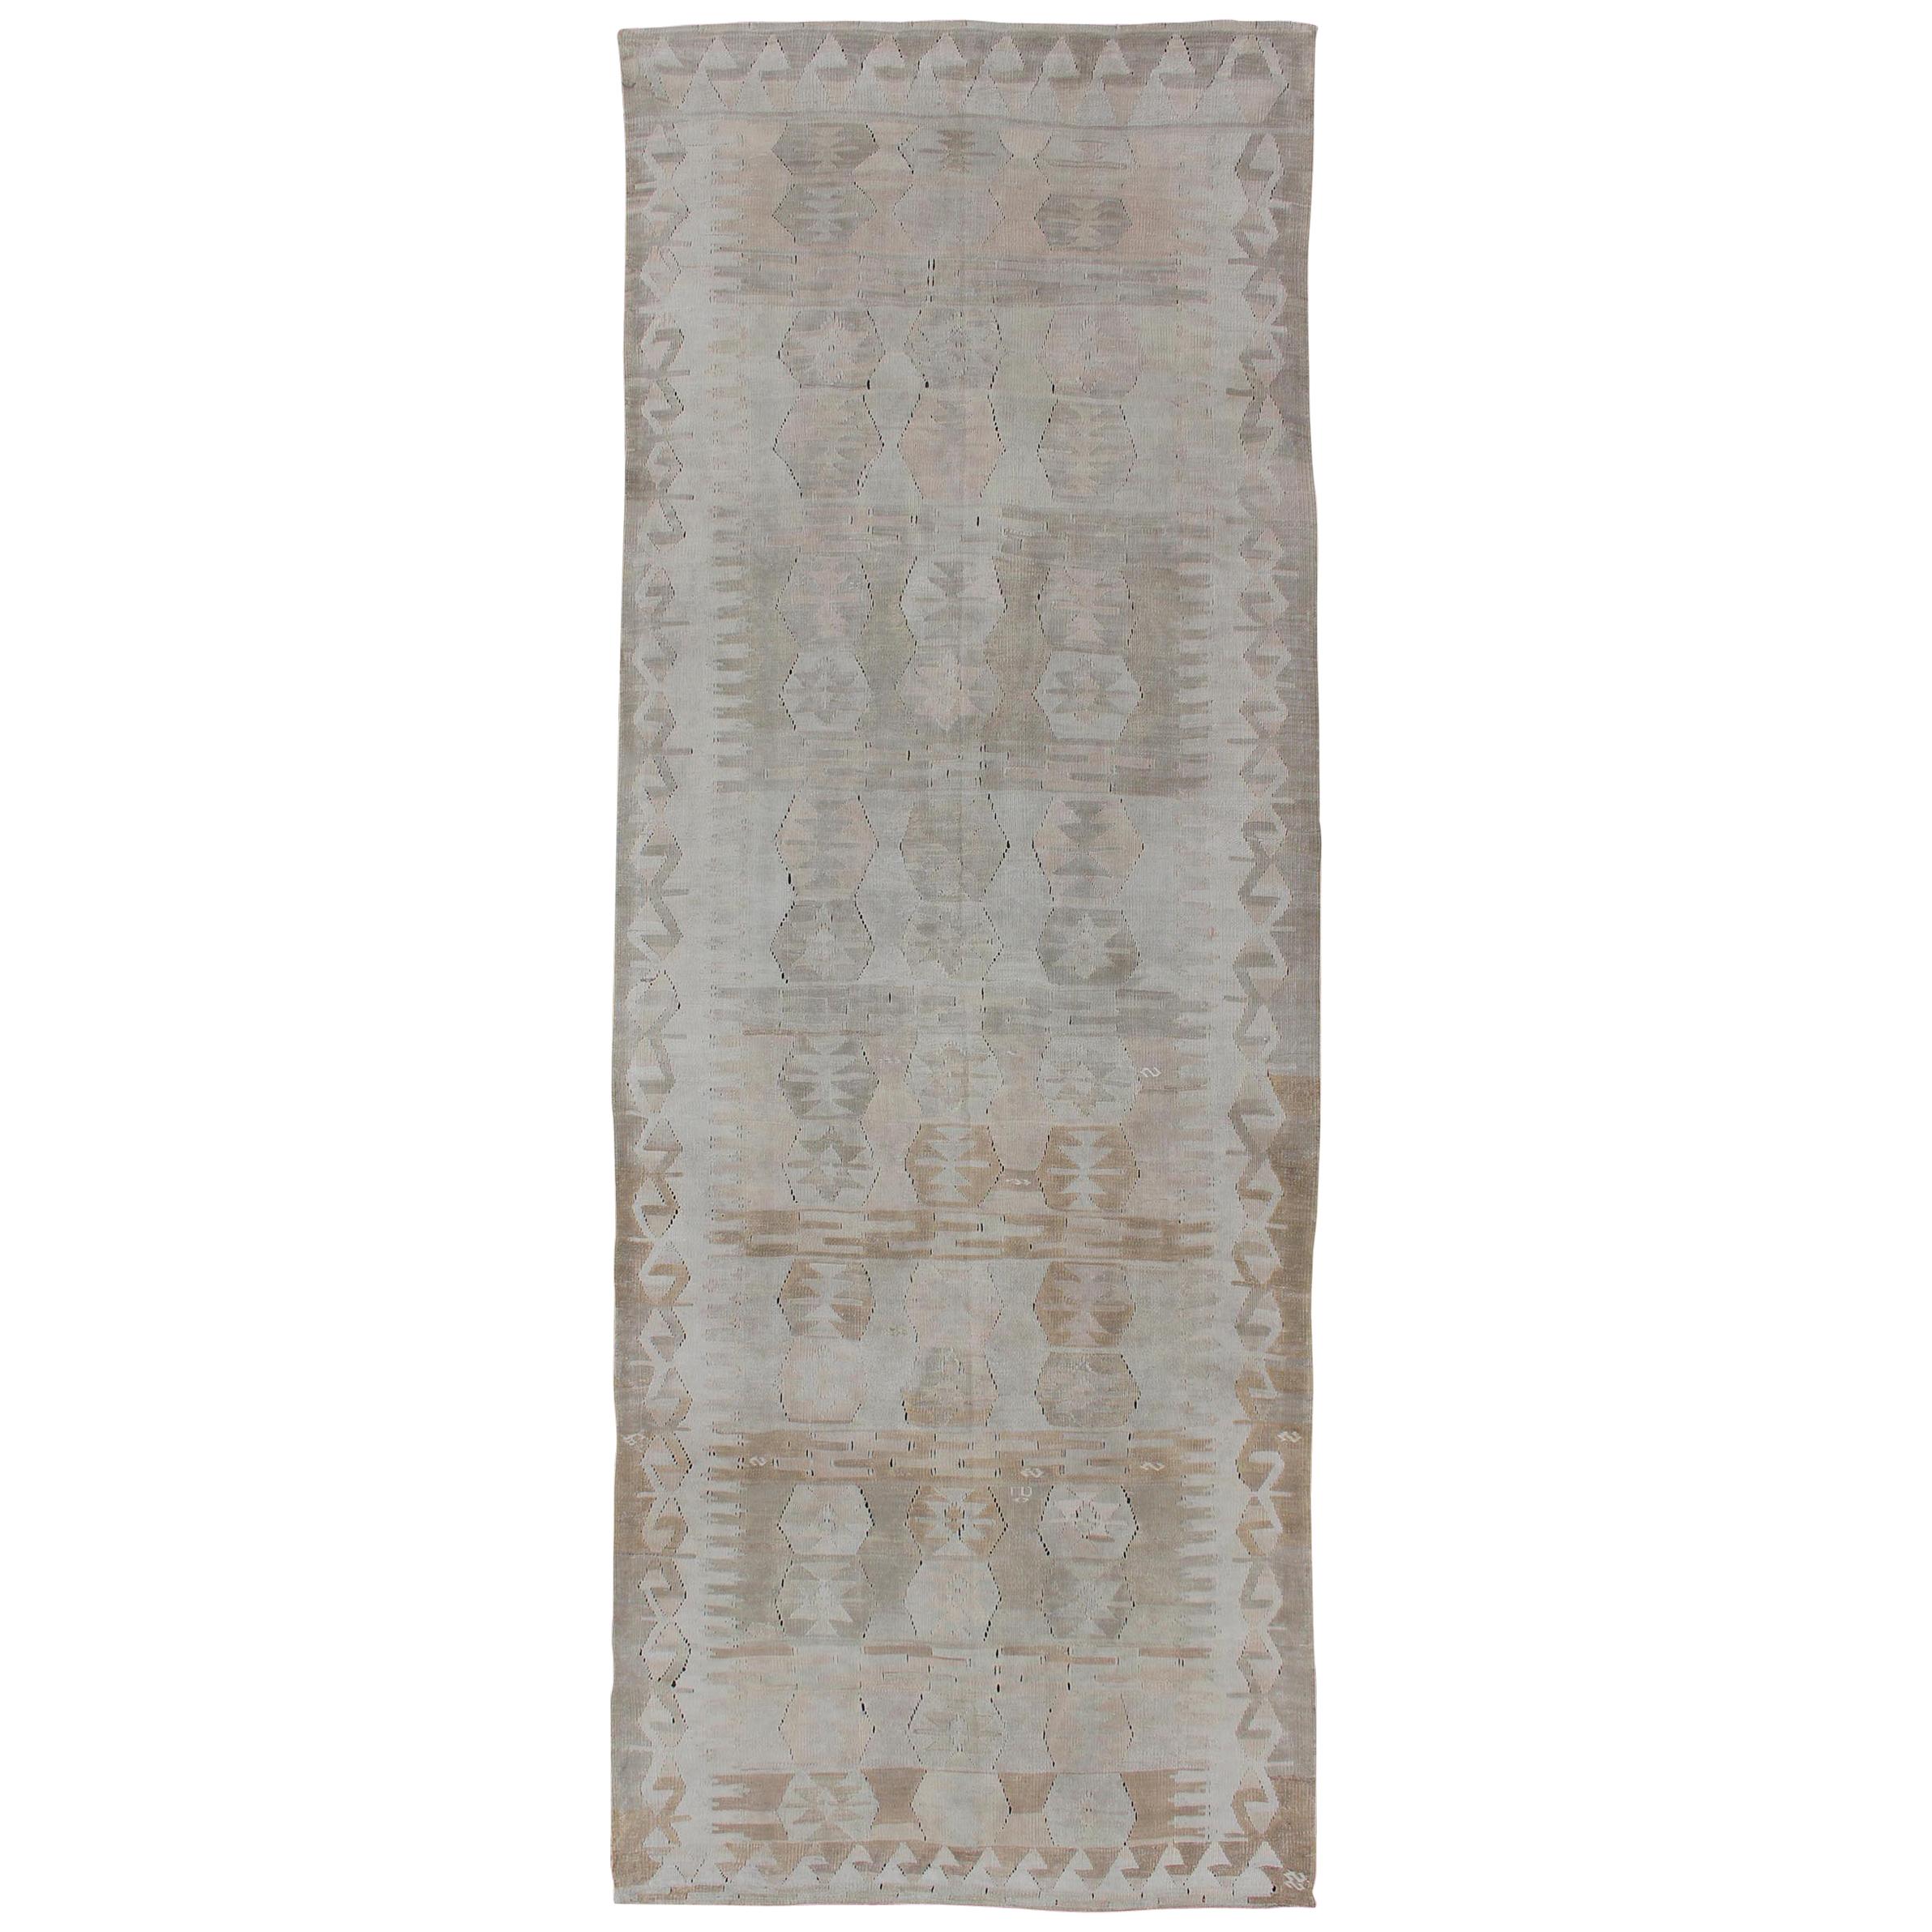 Ivory, Gray, and Blush Antique Turkish Kilim Flat-Weave Gallery Rug